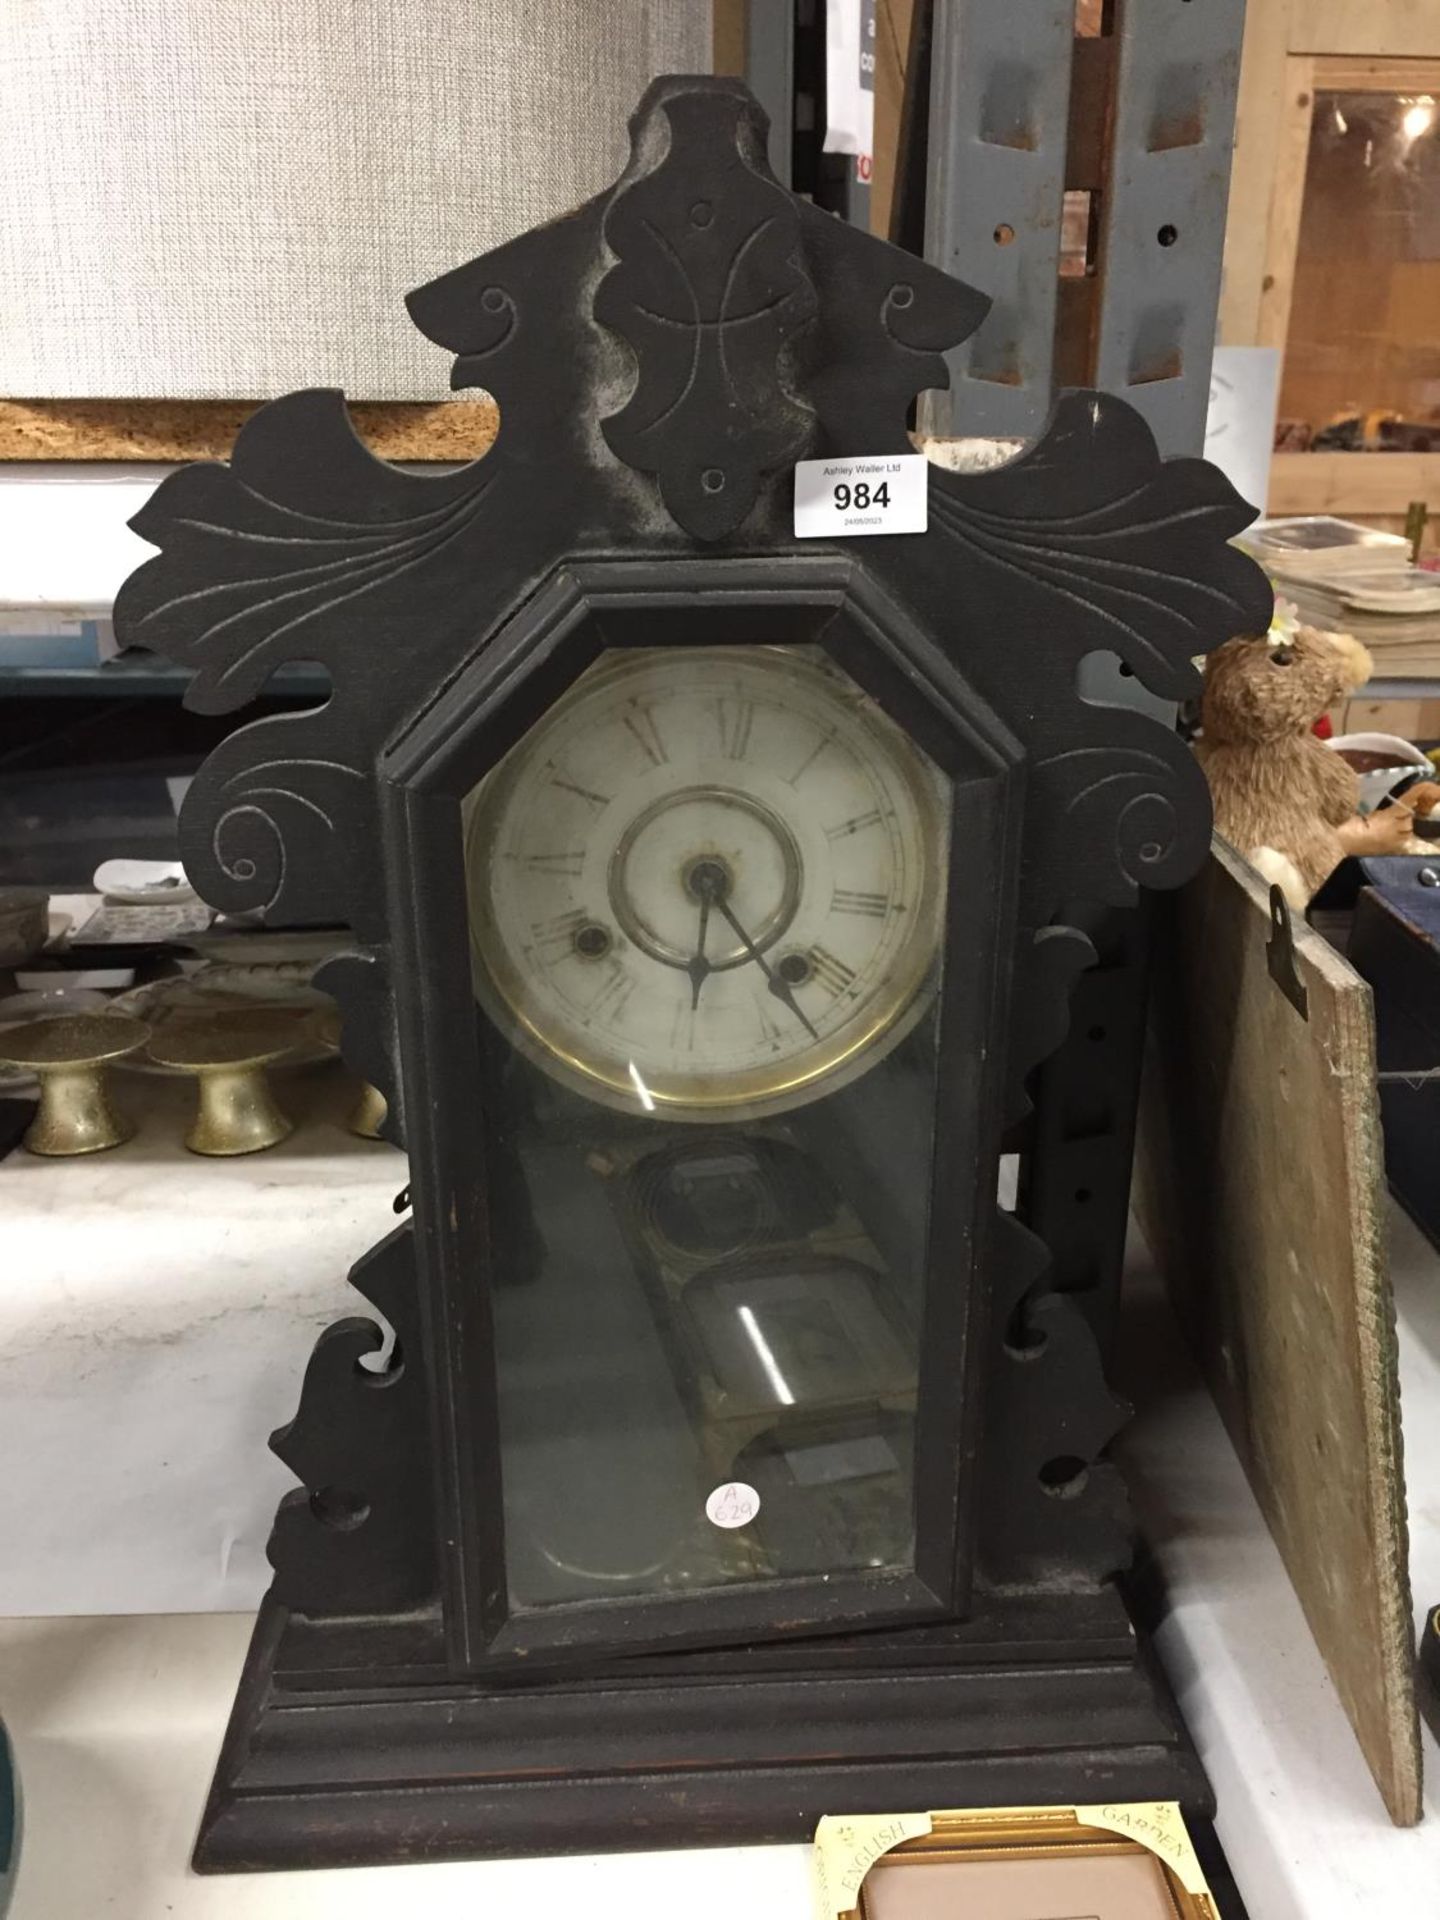 A VINTAGE WOODEN CASED WALL CLOCK WITH PENDULUM - IN NEED OF RESTORATION